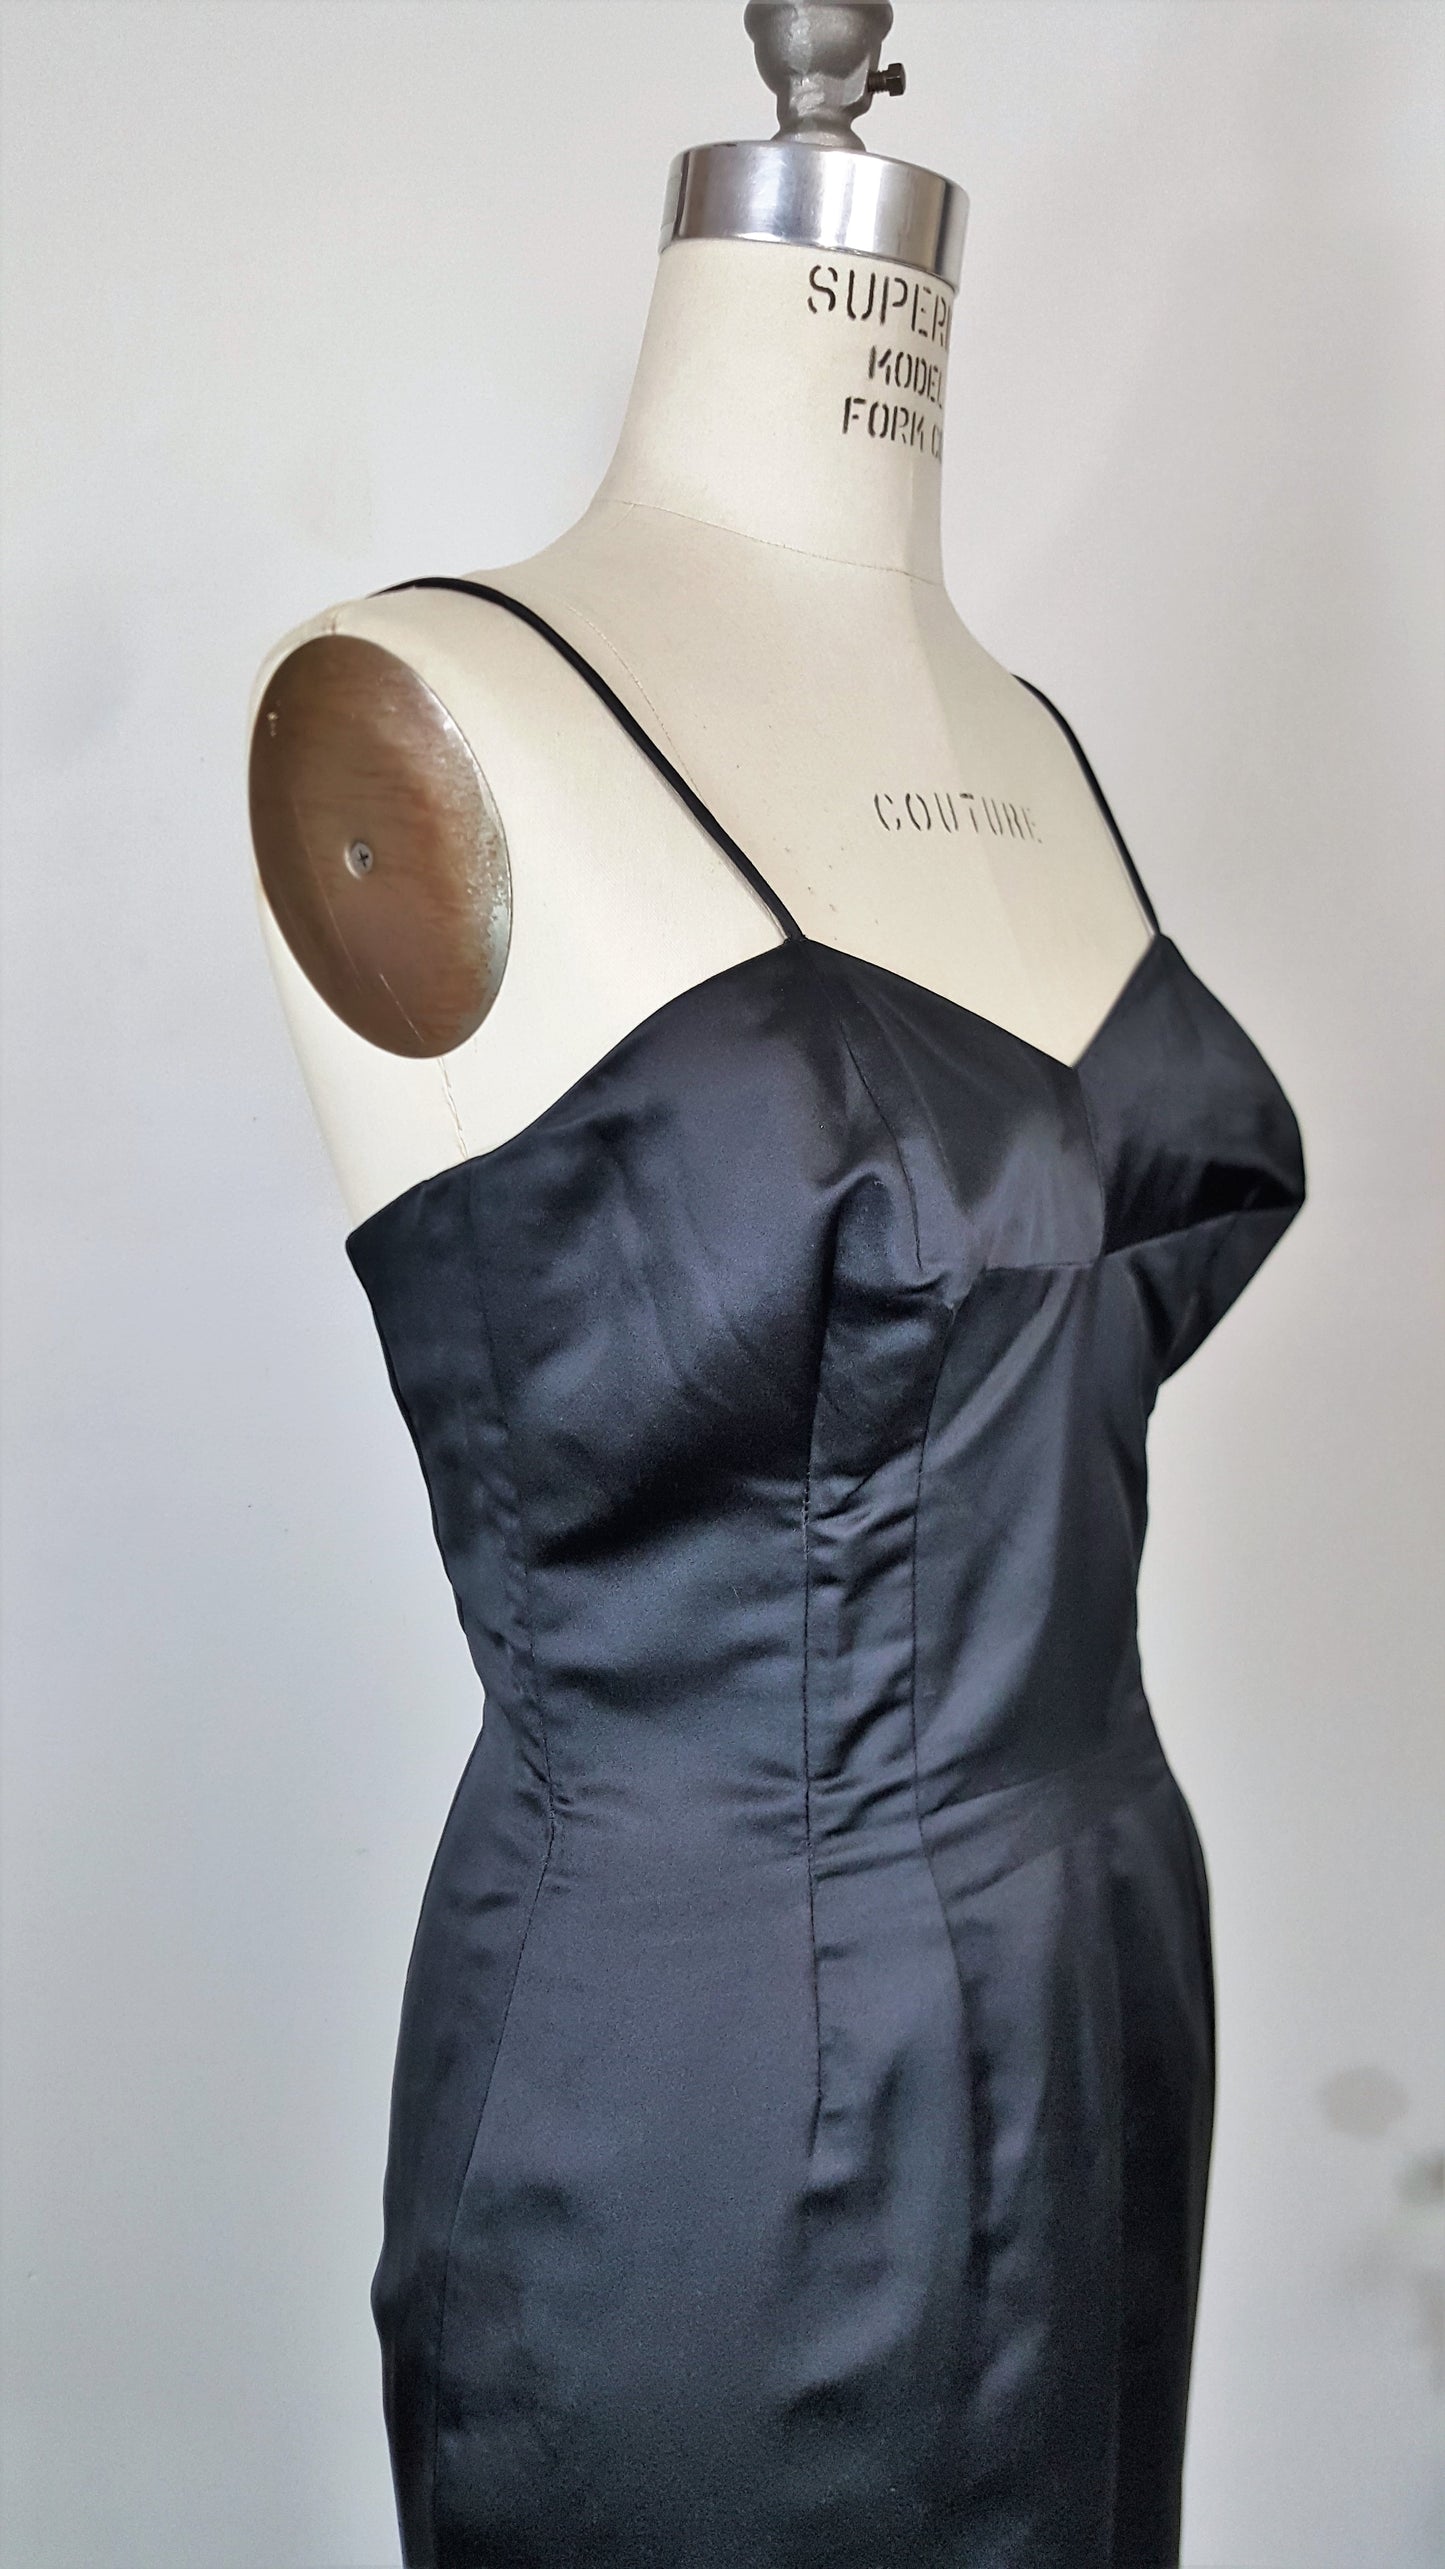 Vintage 1950s Wiggle Dress With Bullet Bra And Matching Jacket  In Black Satin 